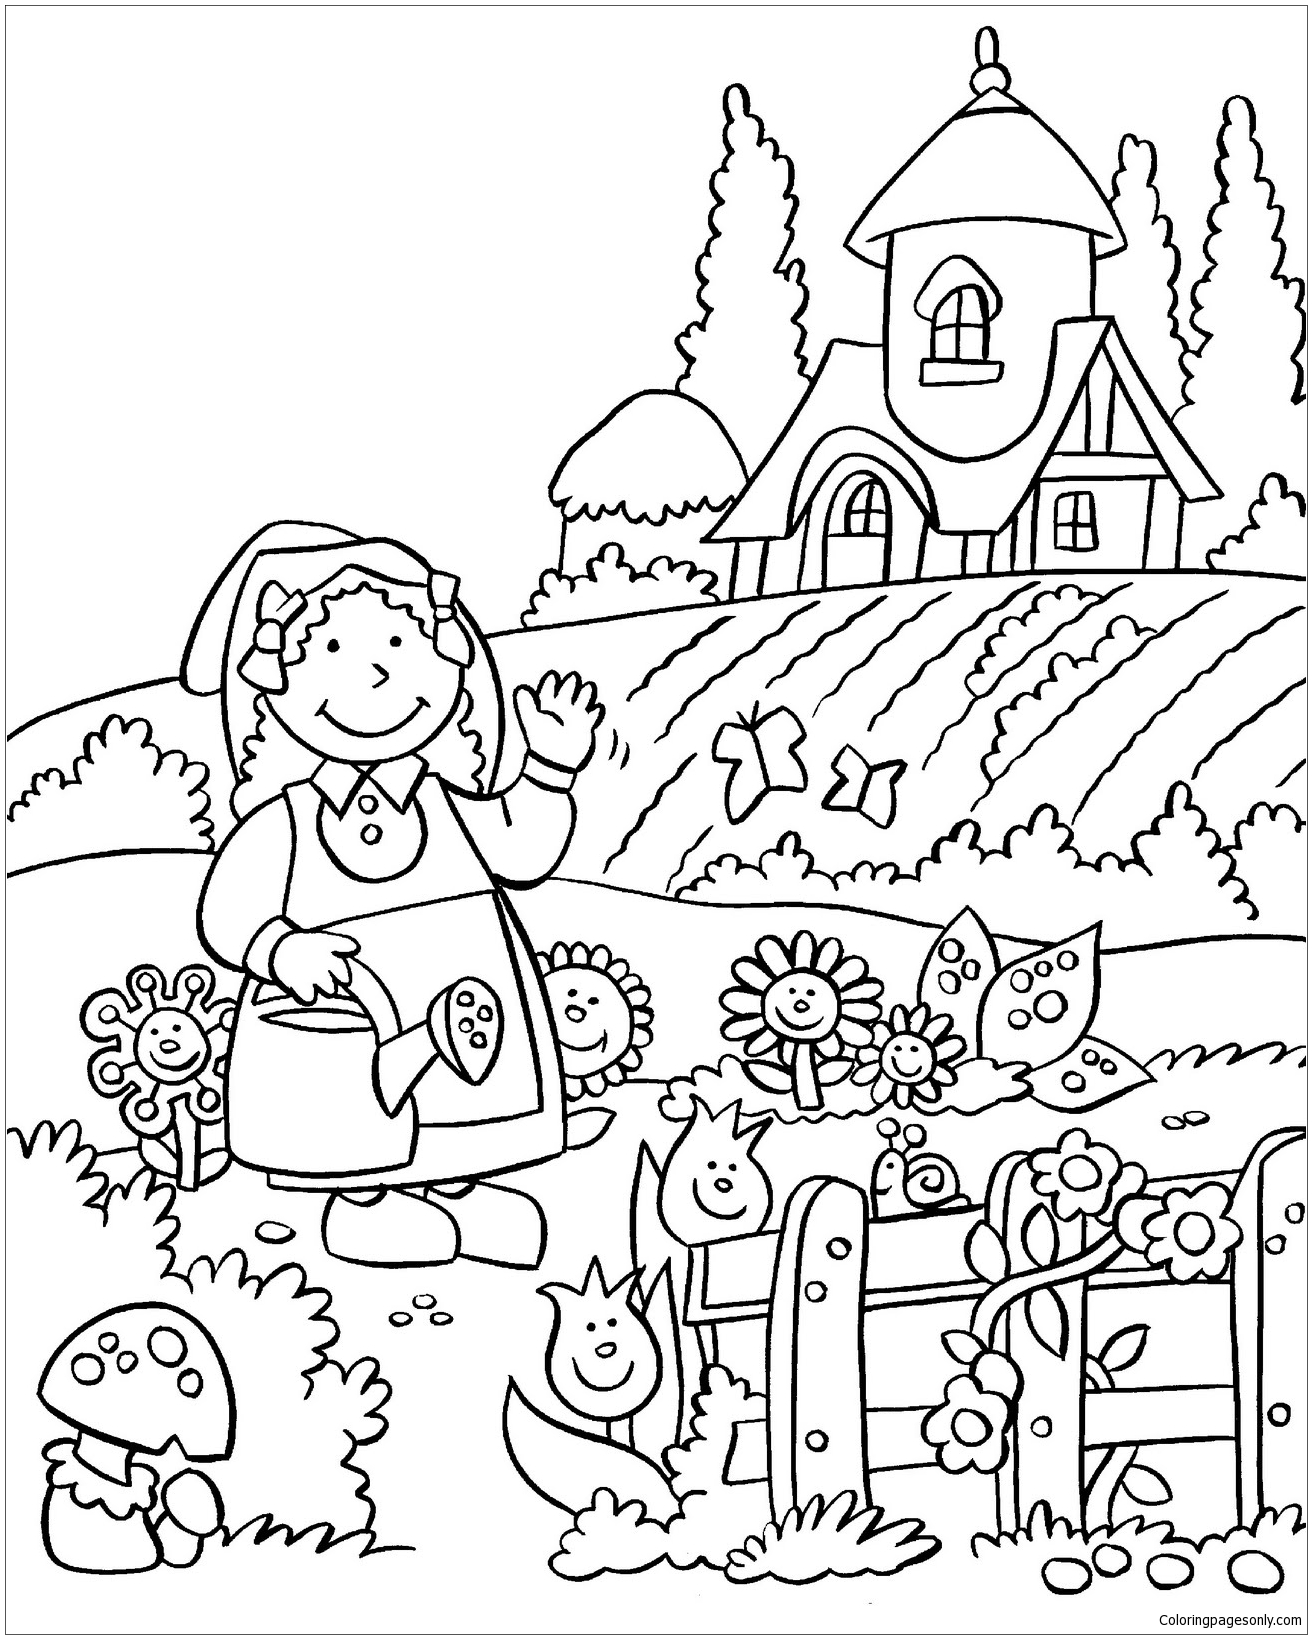 The Beautiful Flower Garden Coloring Pages - Nature & Seasons Coloring Pages  - Coloring Pages For Kids And Adults